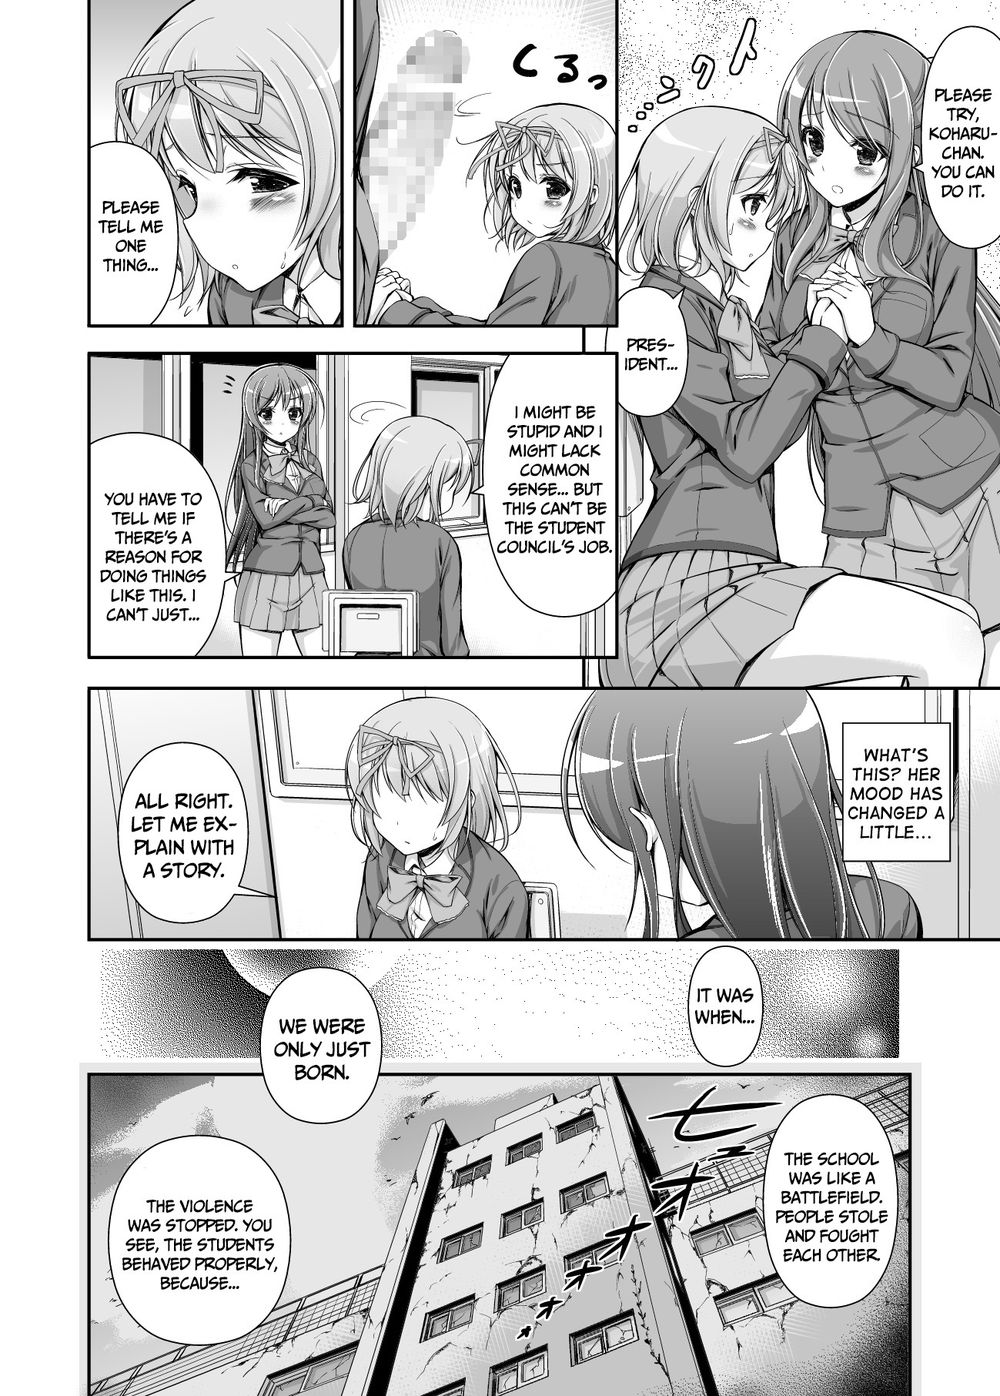 Hentai Manga Comic-Student Council's Special Service-Read-13